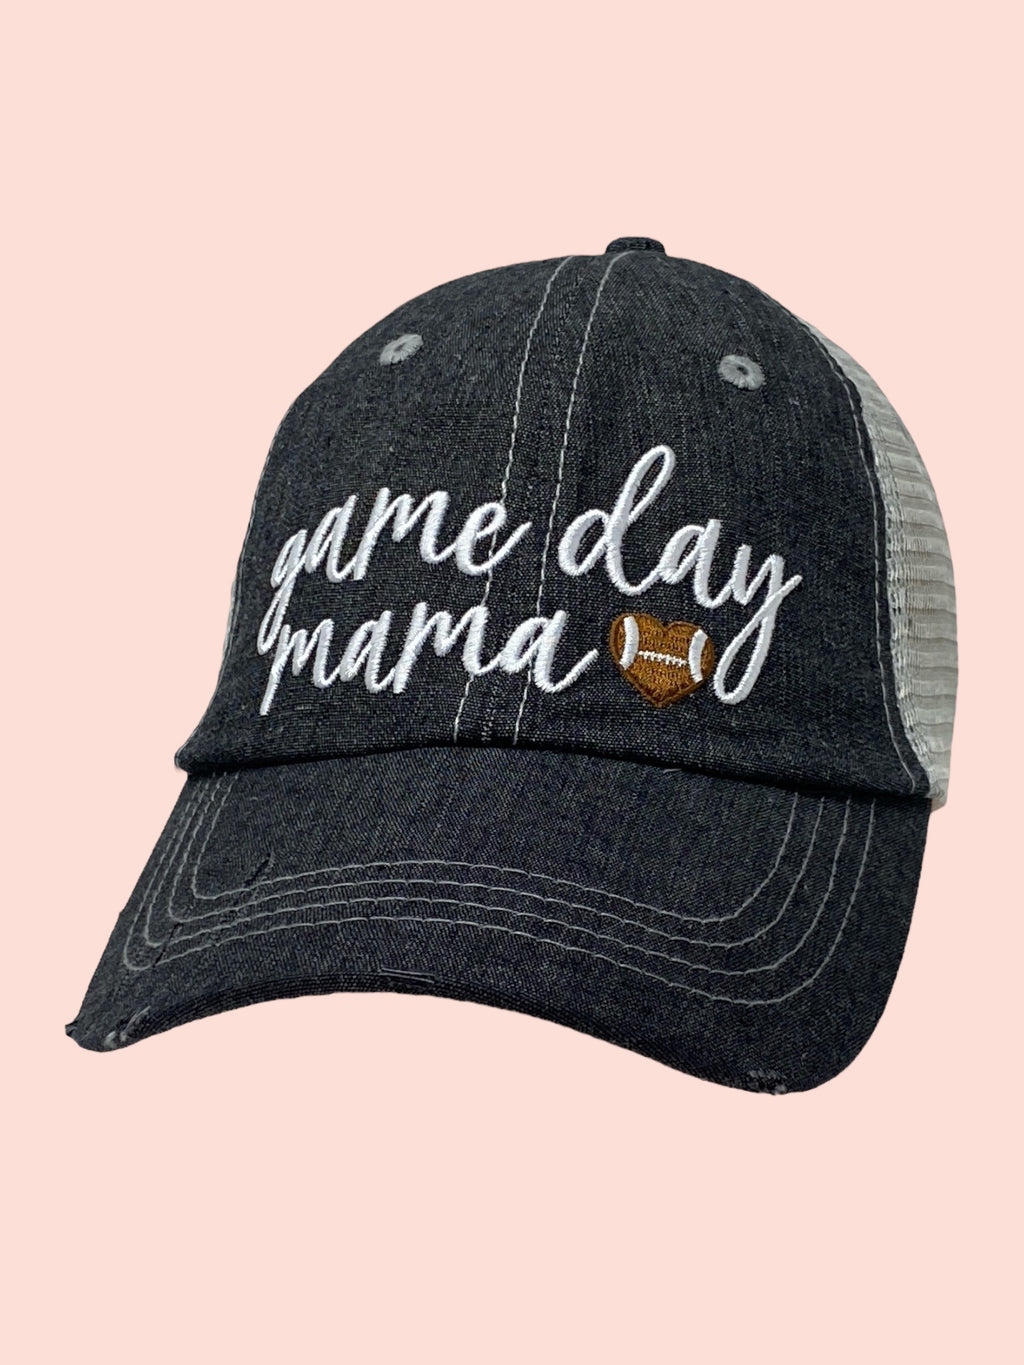 Game Day Mama Football Mom Mesh Embroidered MESH Hat Trucker Hat Cap -232